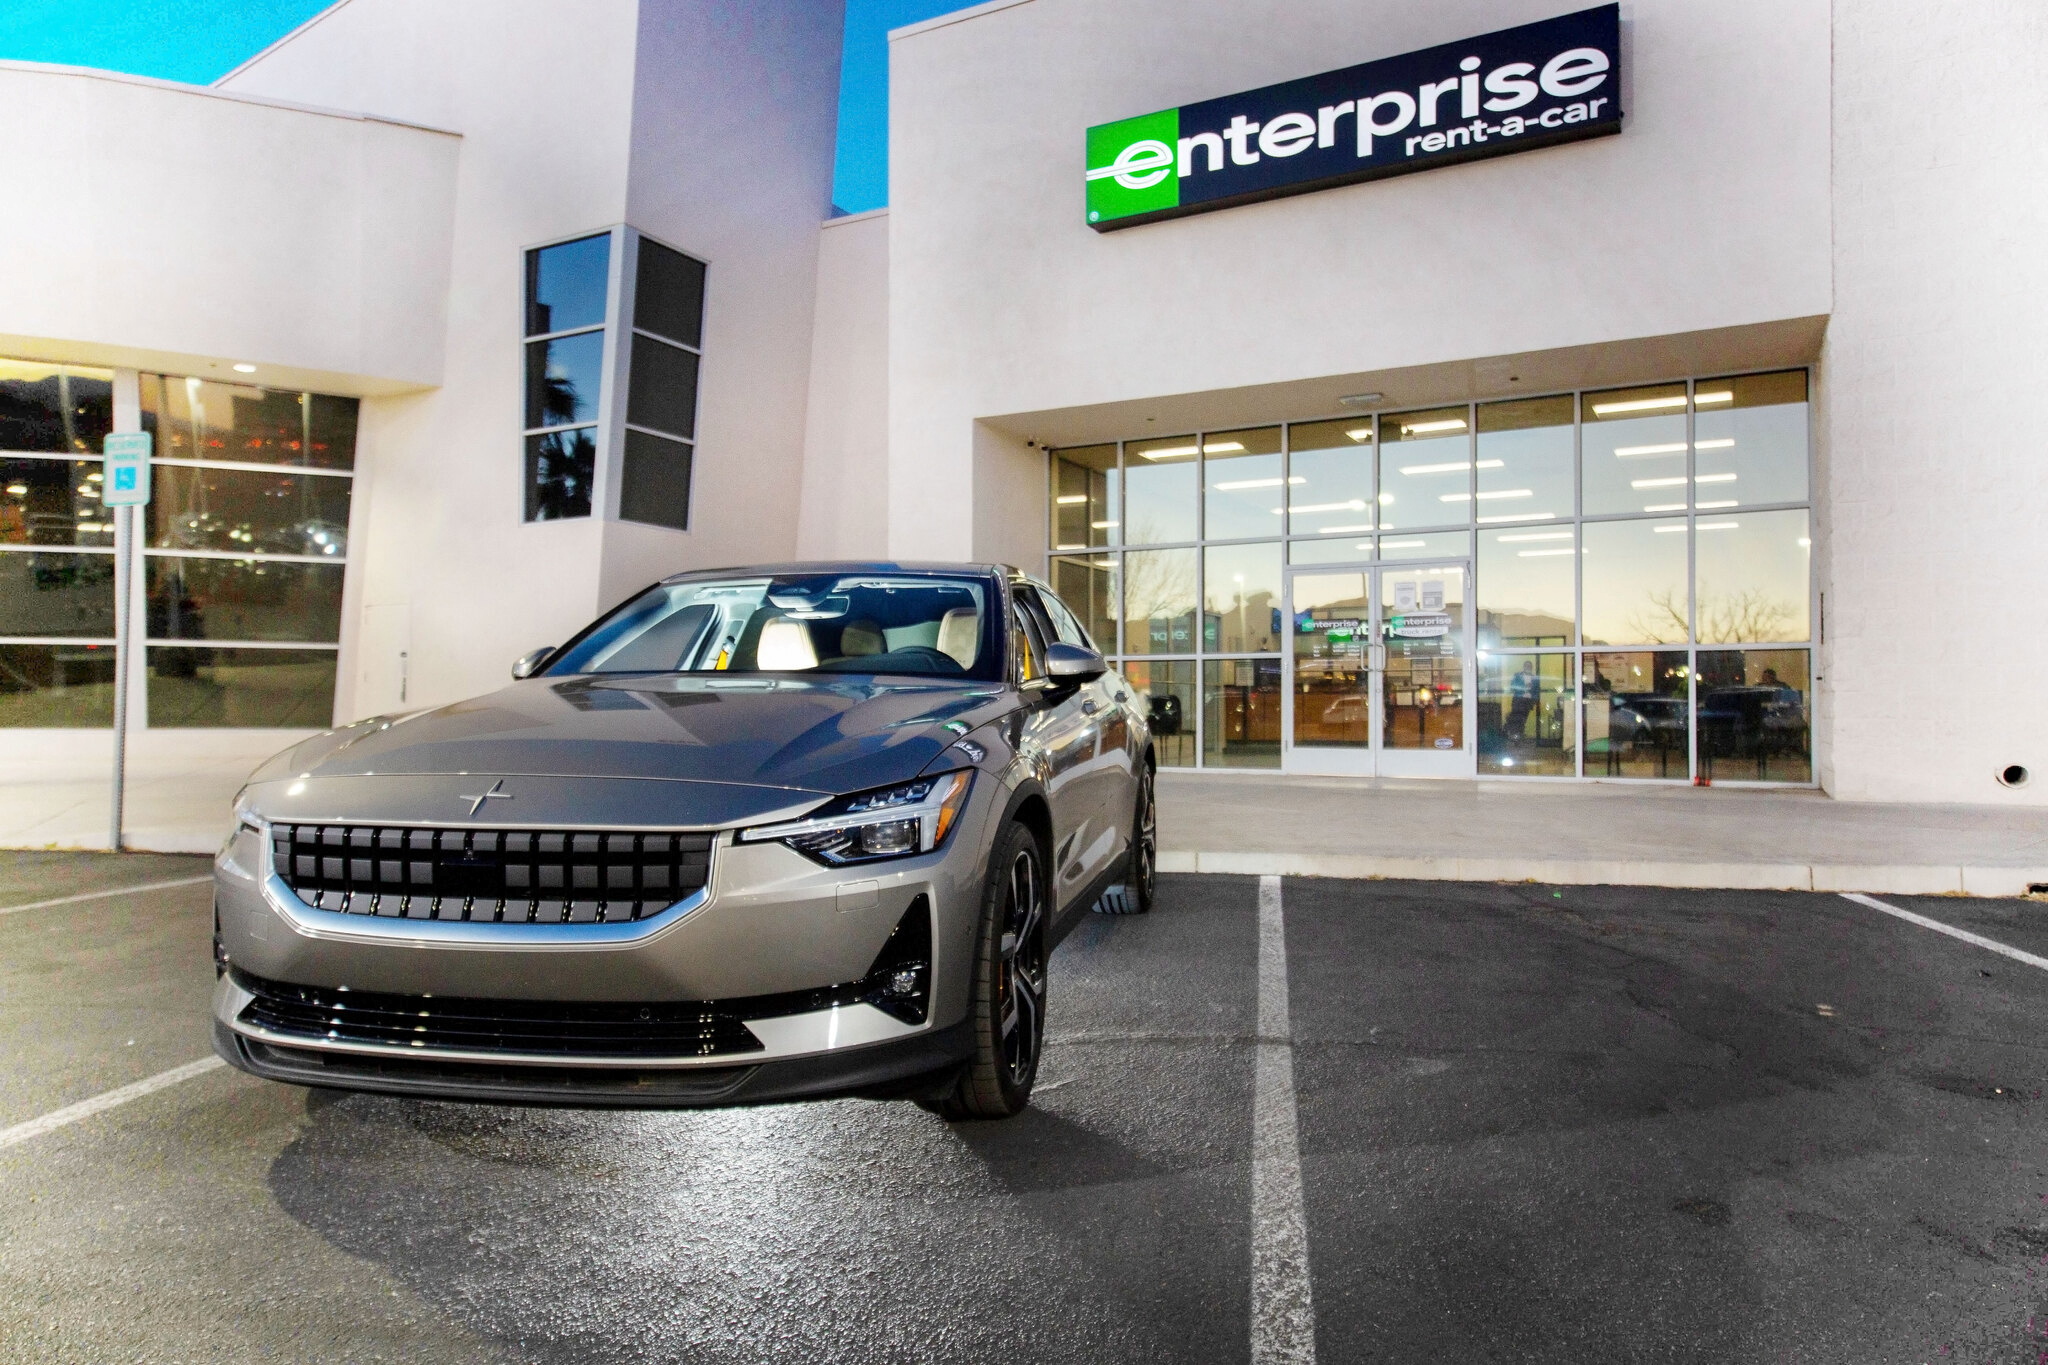 An electric vehicle by manufacturer Polestar is seen in front of an Enterprise Rent-A-Car location, in Las Vegas